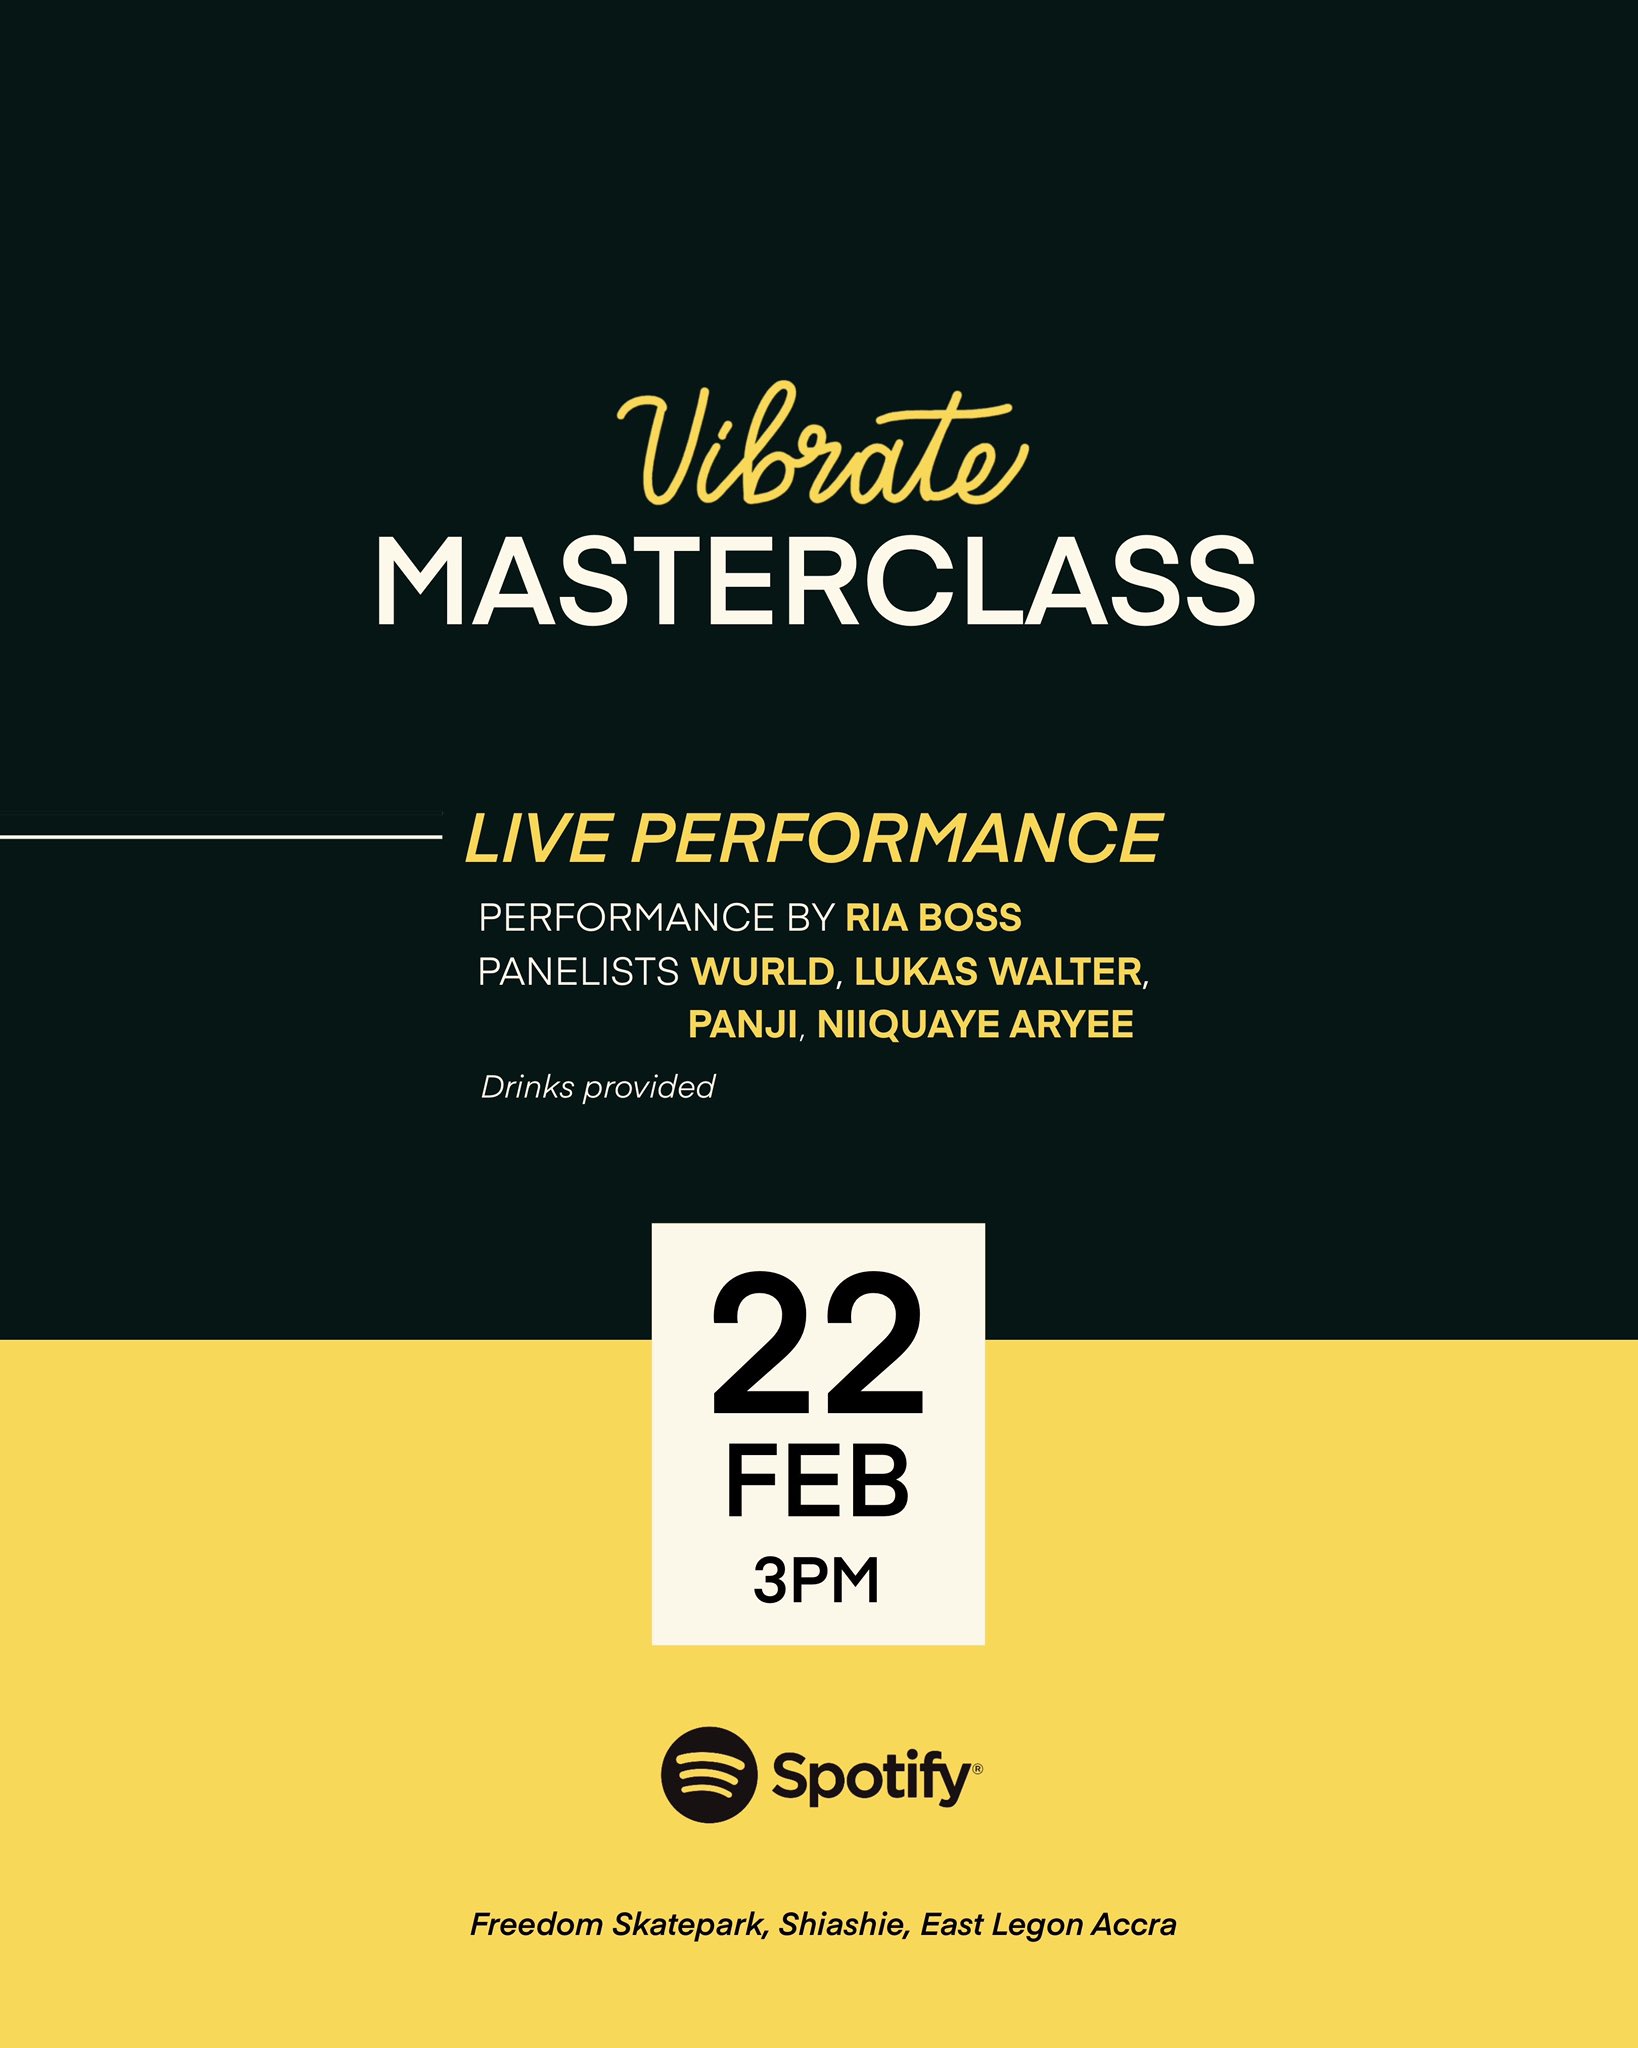 The Vibrate Masterclass: The Art of Live Performance